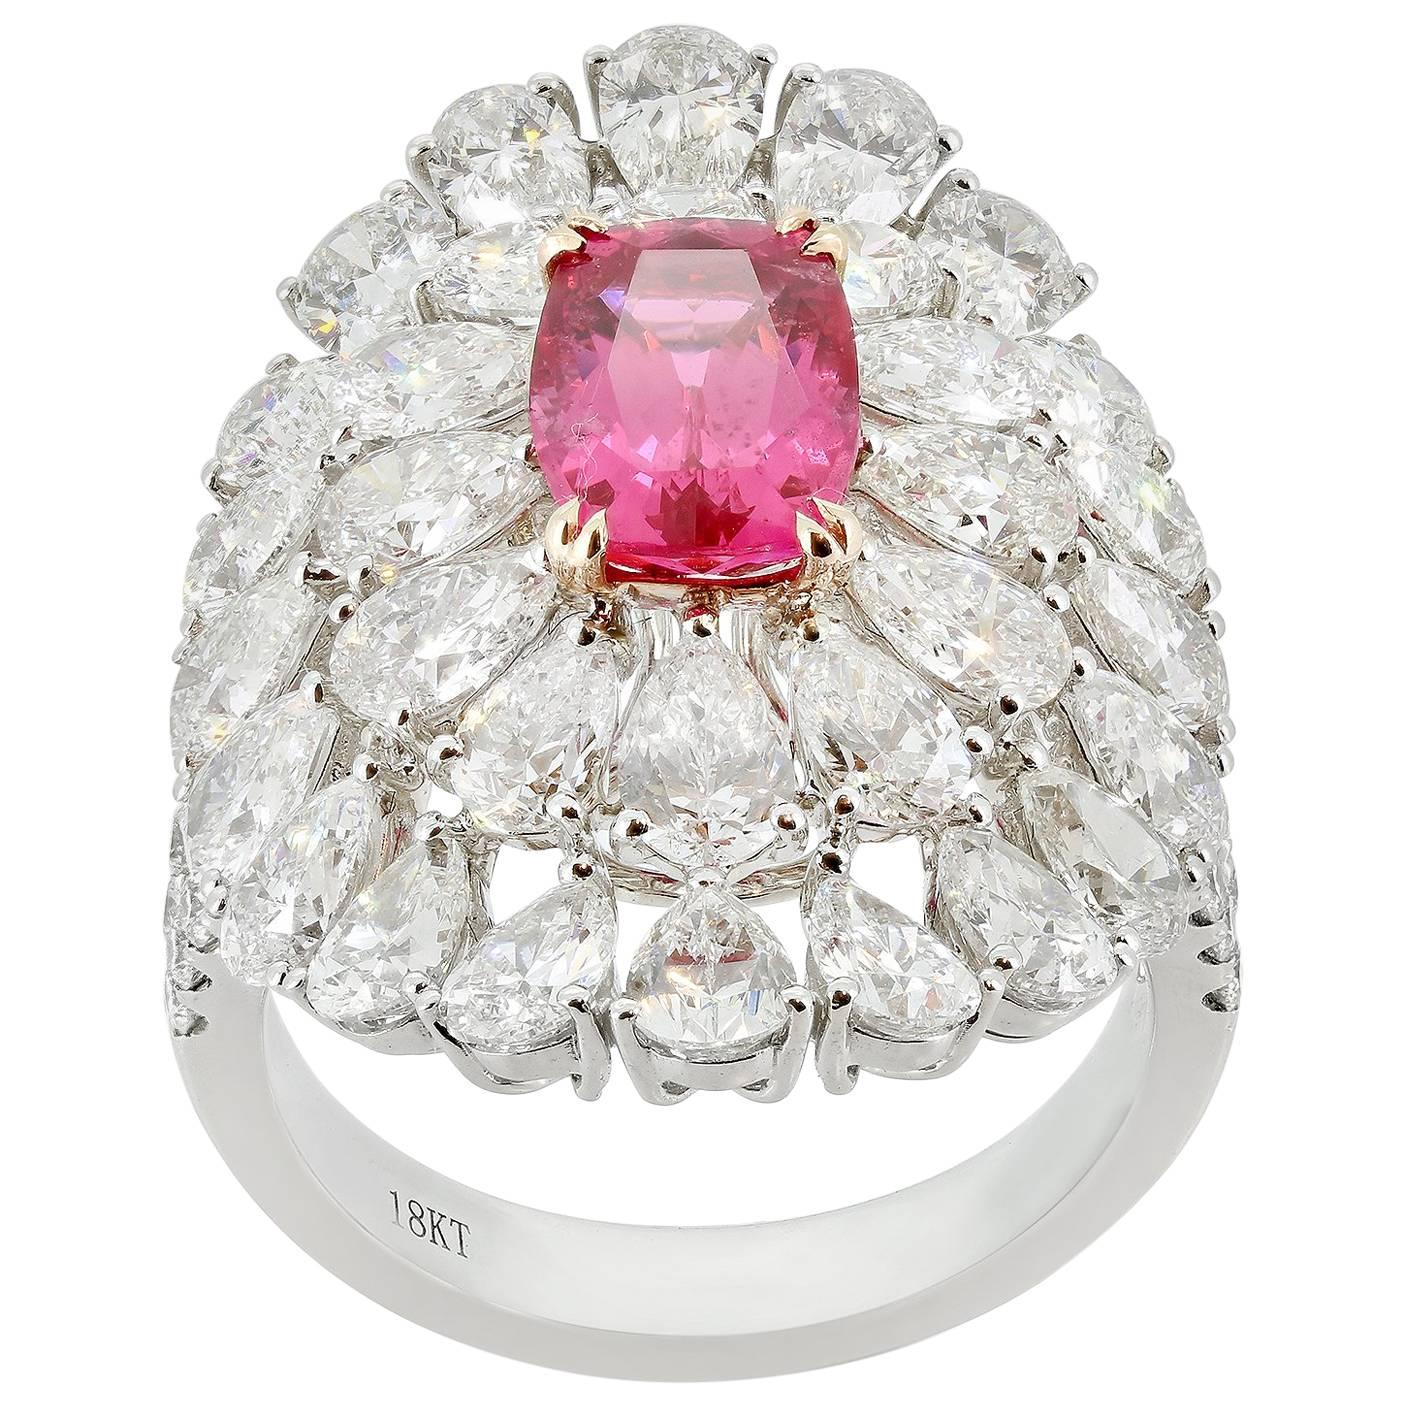 2.20 Carat Pink Spinel Diamond Cocktail Ring For Sale